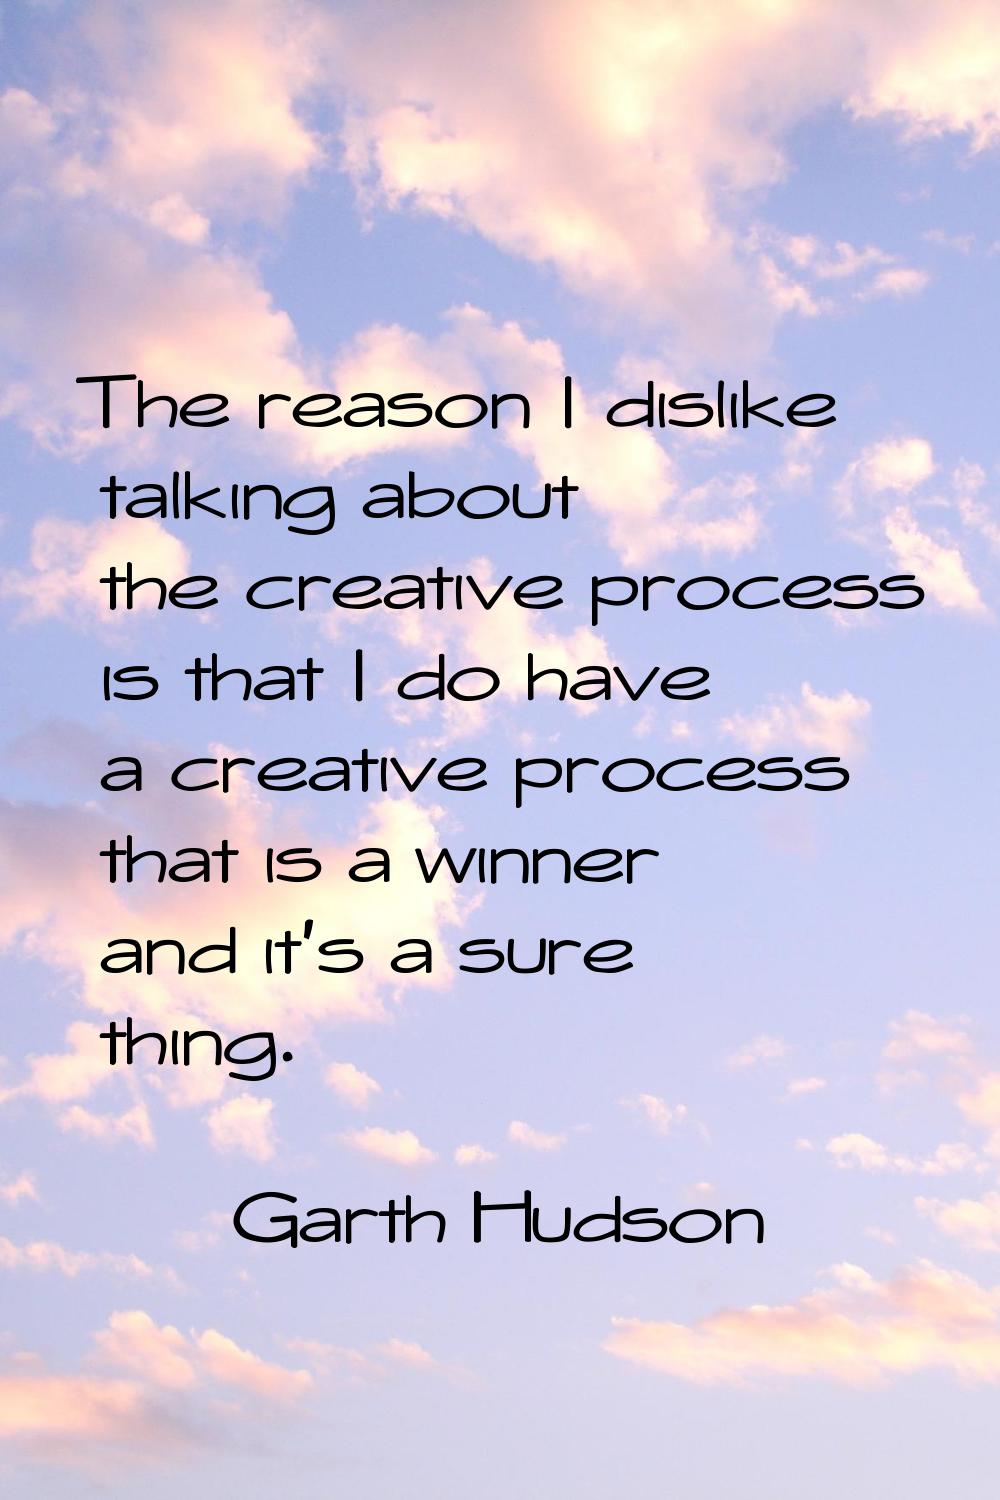 The reason I dislike talking about the creative process is that I do have a creative process that i